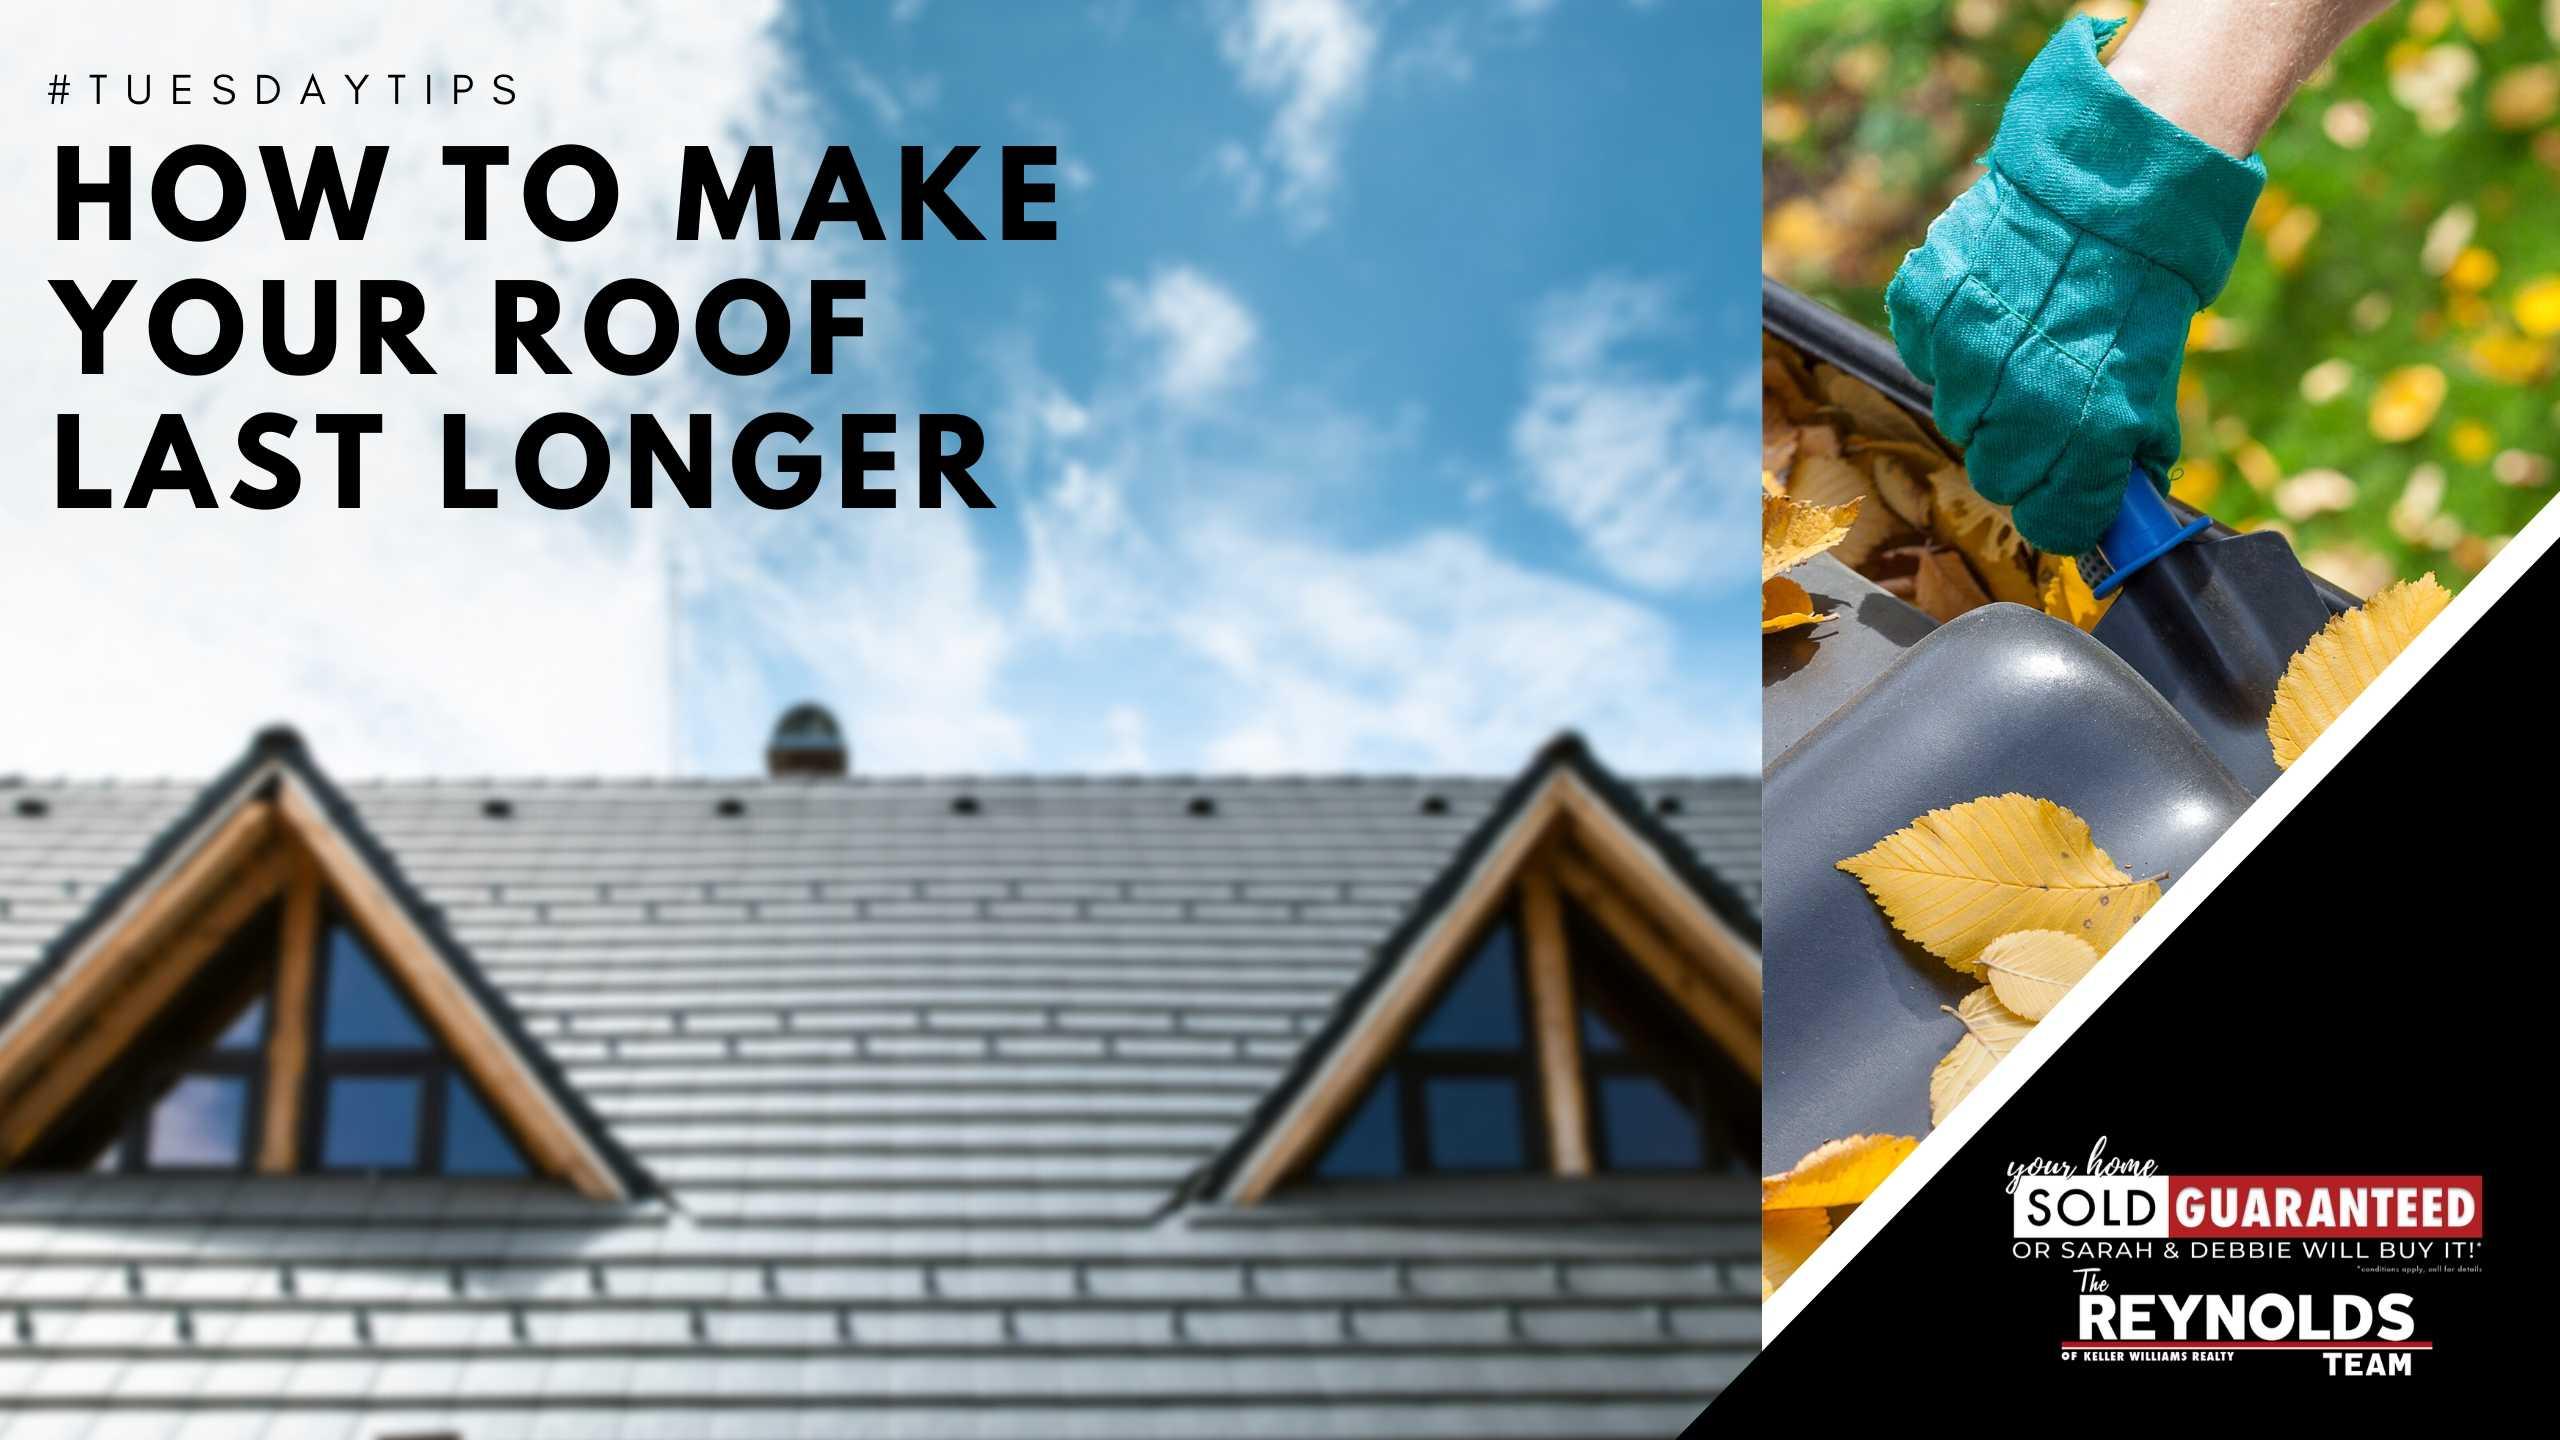 Tuesday Tips- How to Make Your Roof Last Longer